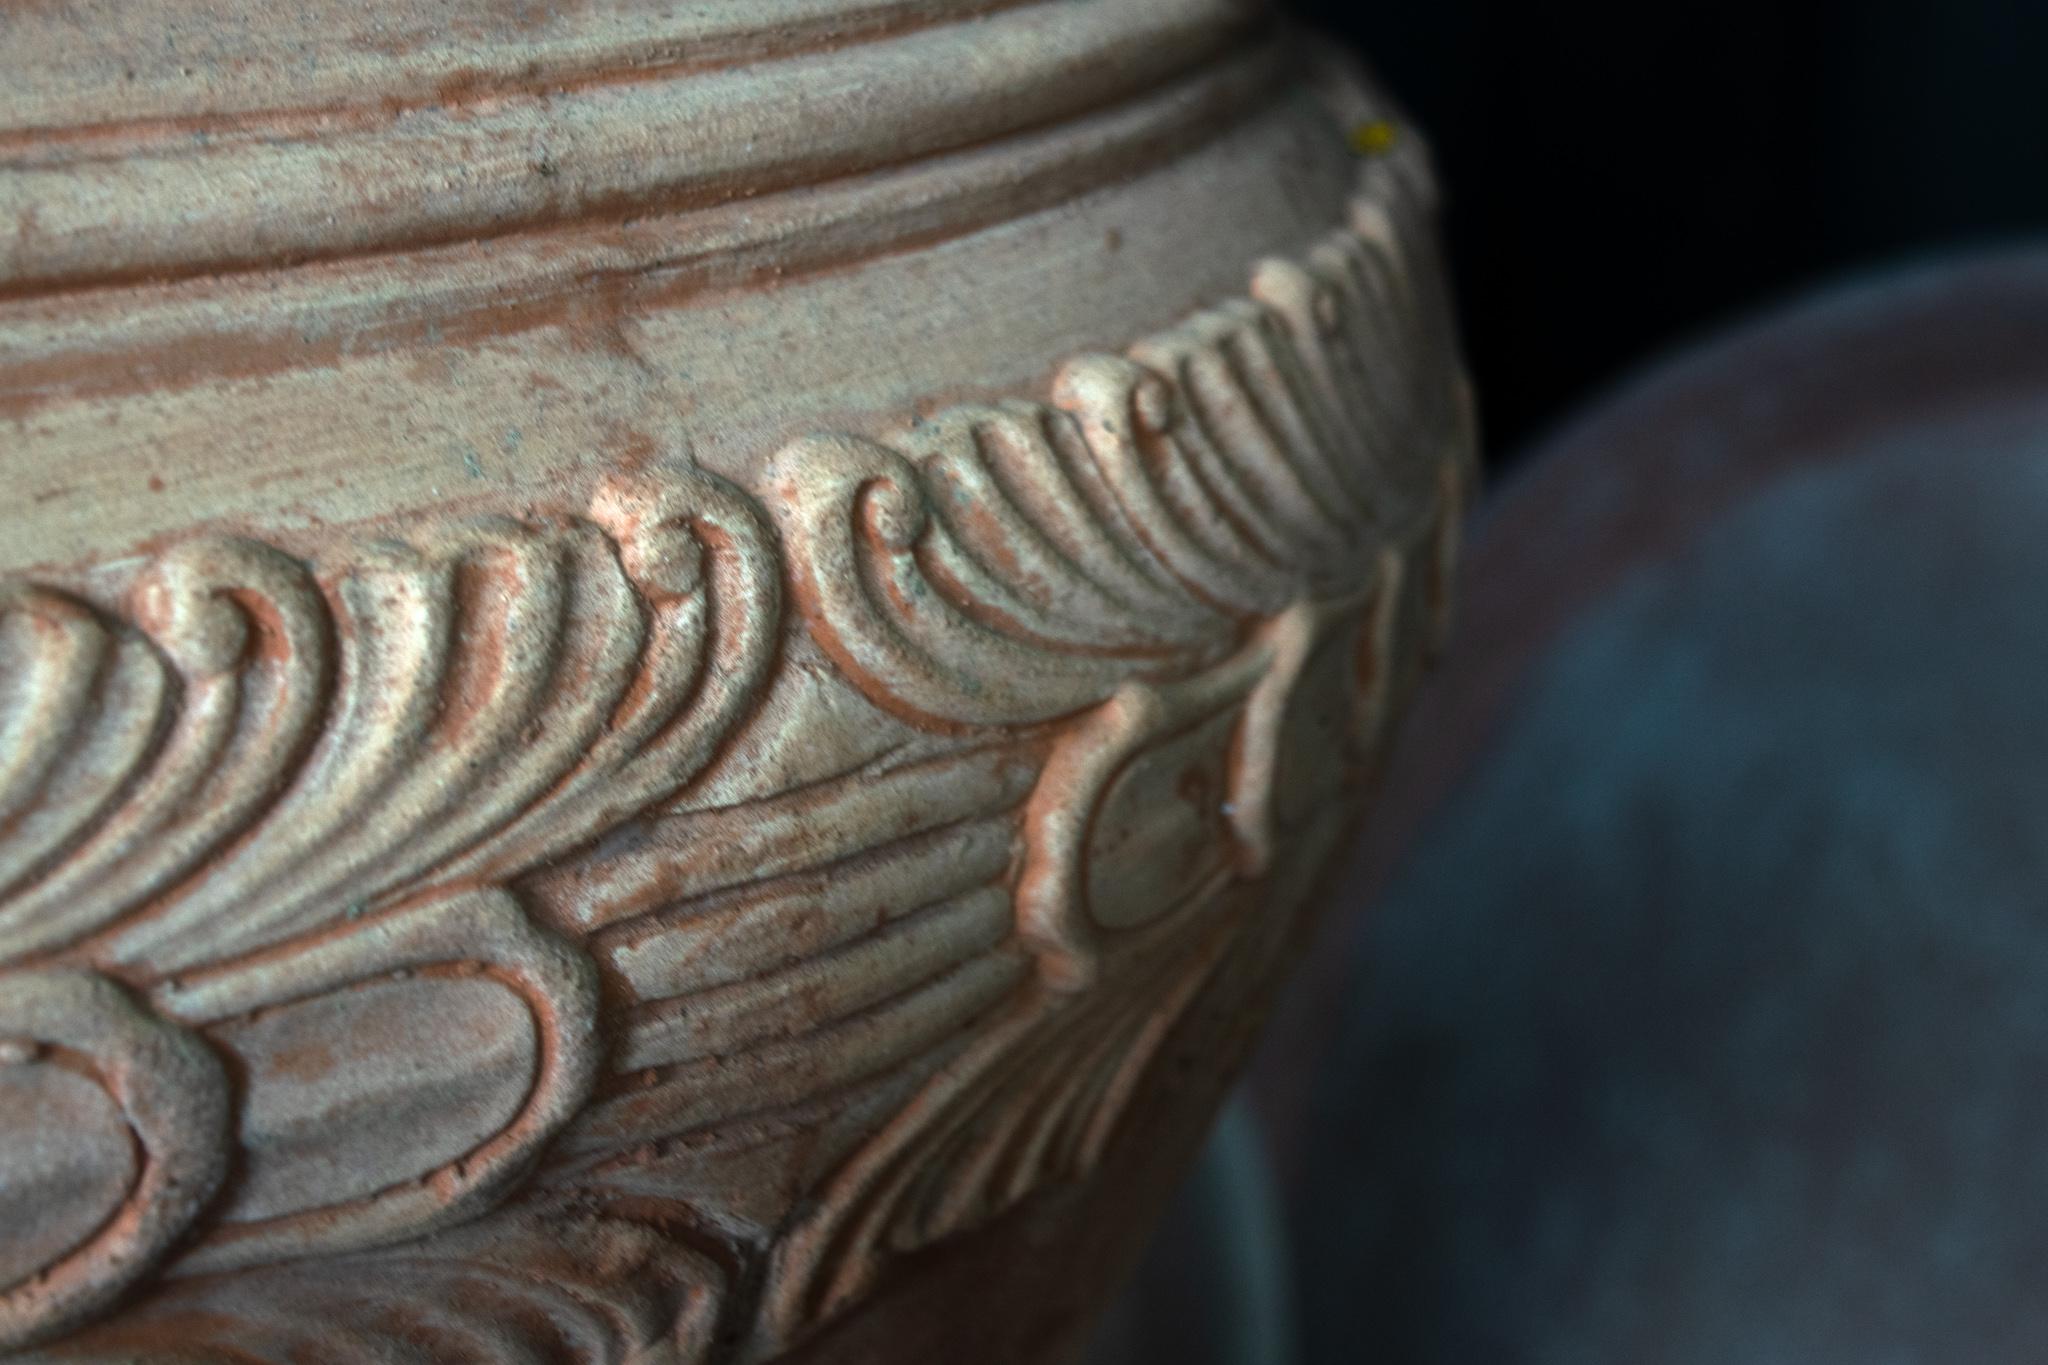 This Italian vase is handcrafted with Impruneta terracotta using rudimentary tools and ancient techniques. Each pot requires an expert skillset to create and can take several weeks to complete.
Due to the dense nature of impruneta terracotta, this